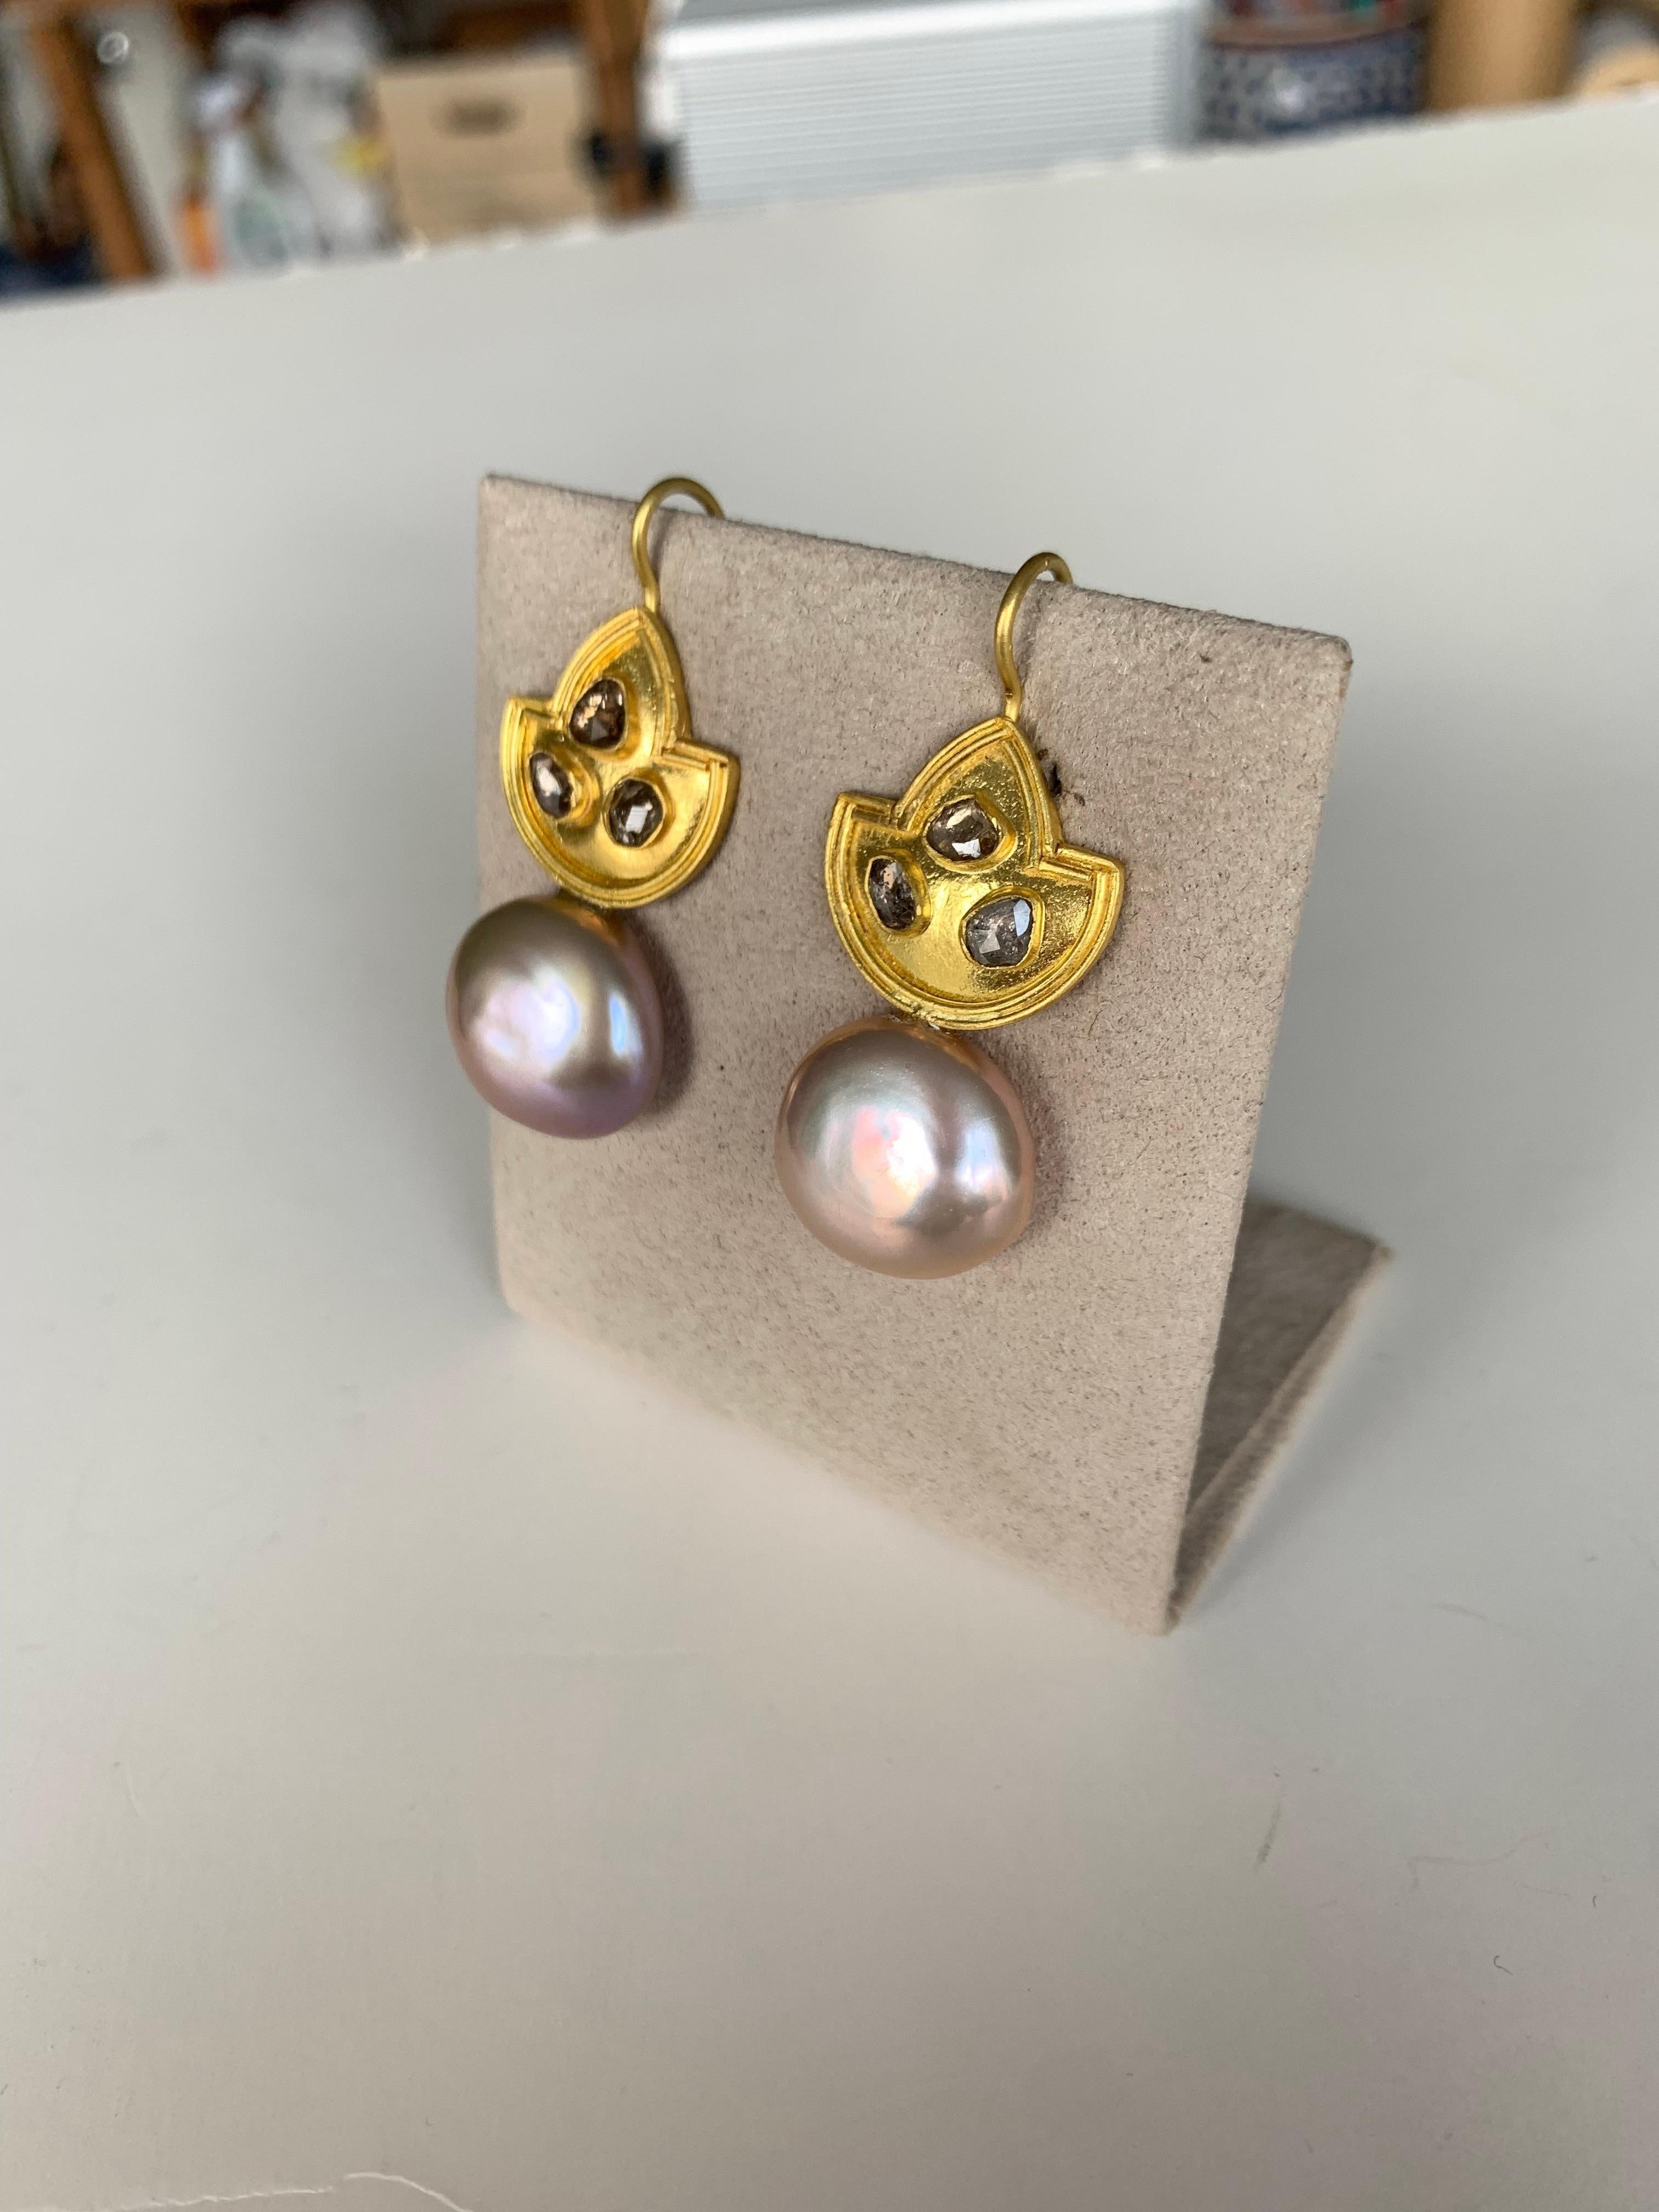 Blush Pearls and Rose Cut Diamond Earrings in 22Karat Gold In New Condition For Sale In New York, NY